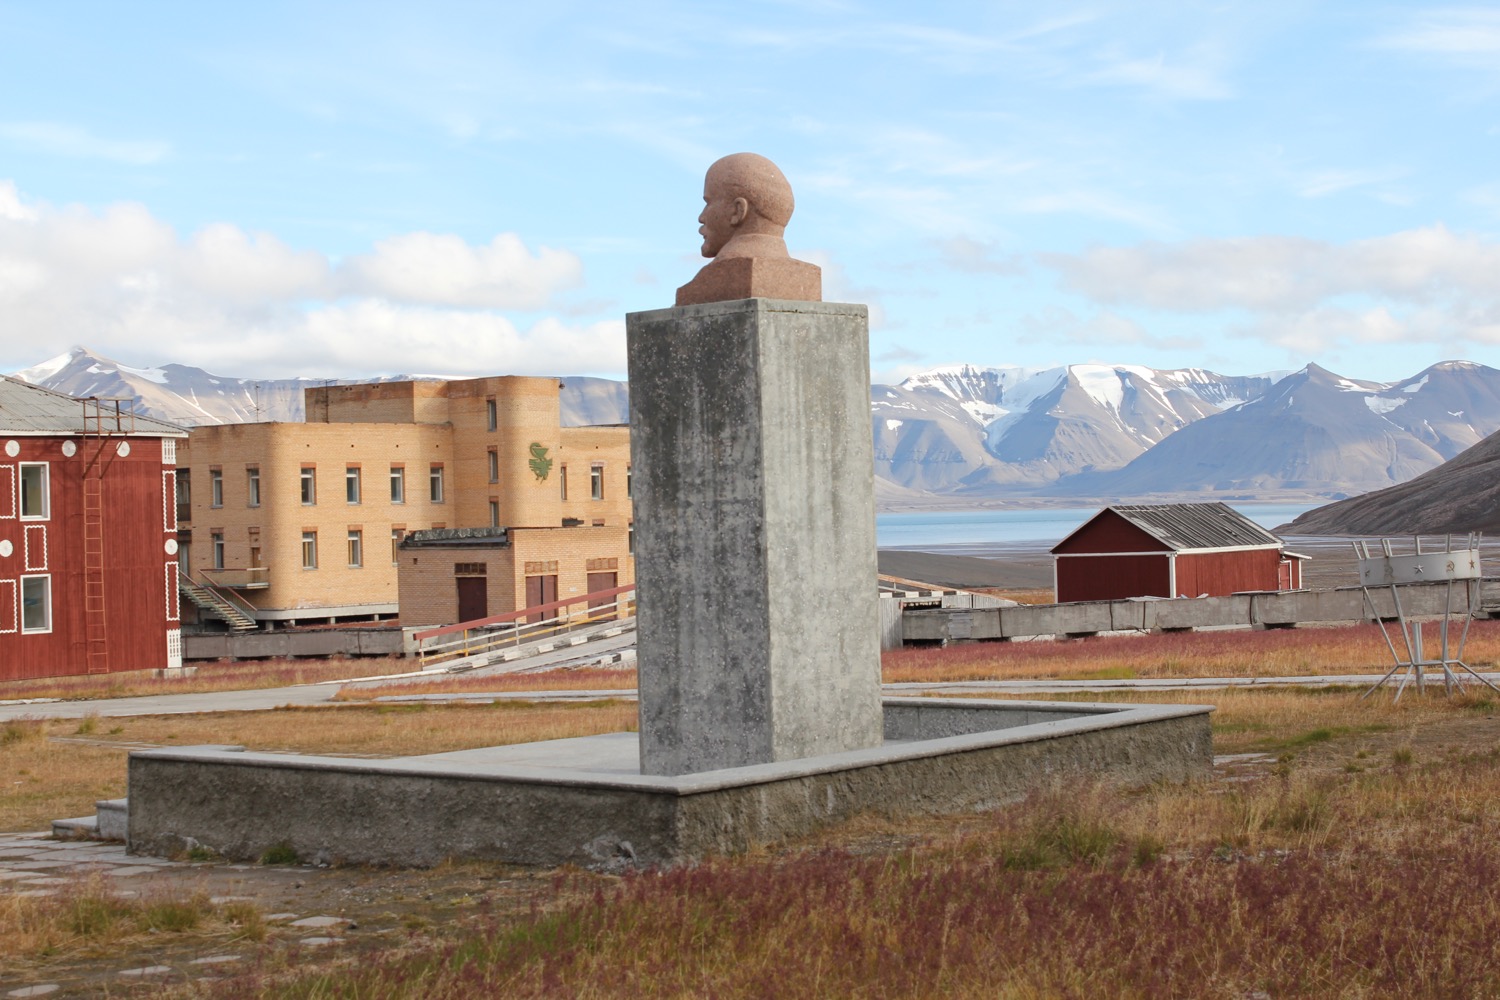 a statue of a man on a pedestal in a field with buildings and mountains in the background